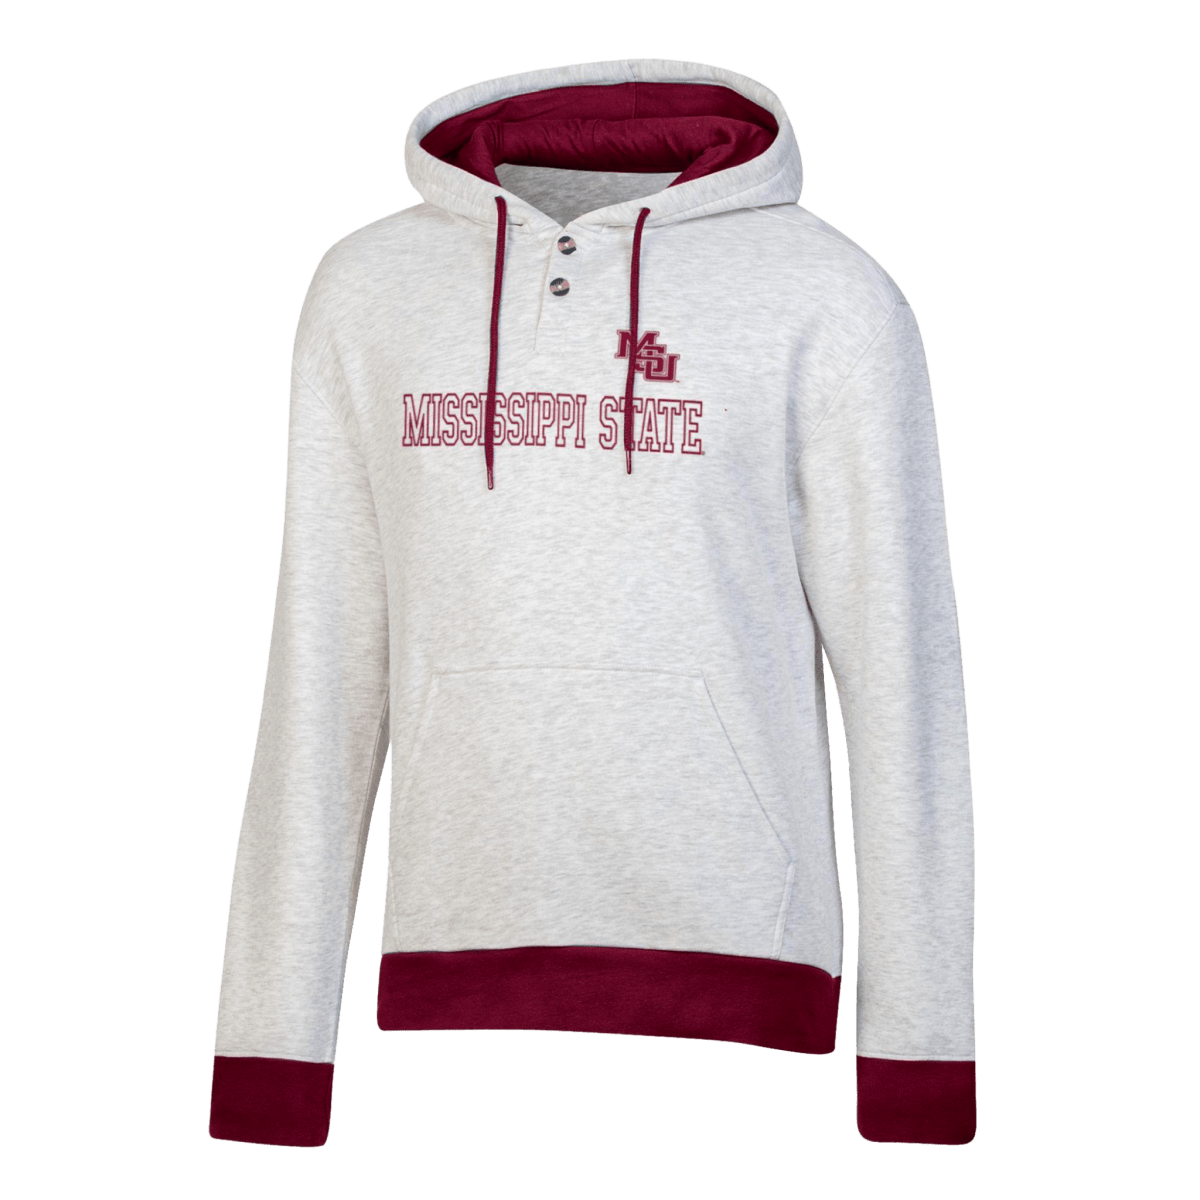 Mississippi State University Collegiate Outline Hoodie - Shop B-Unlimited